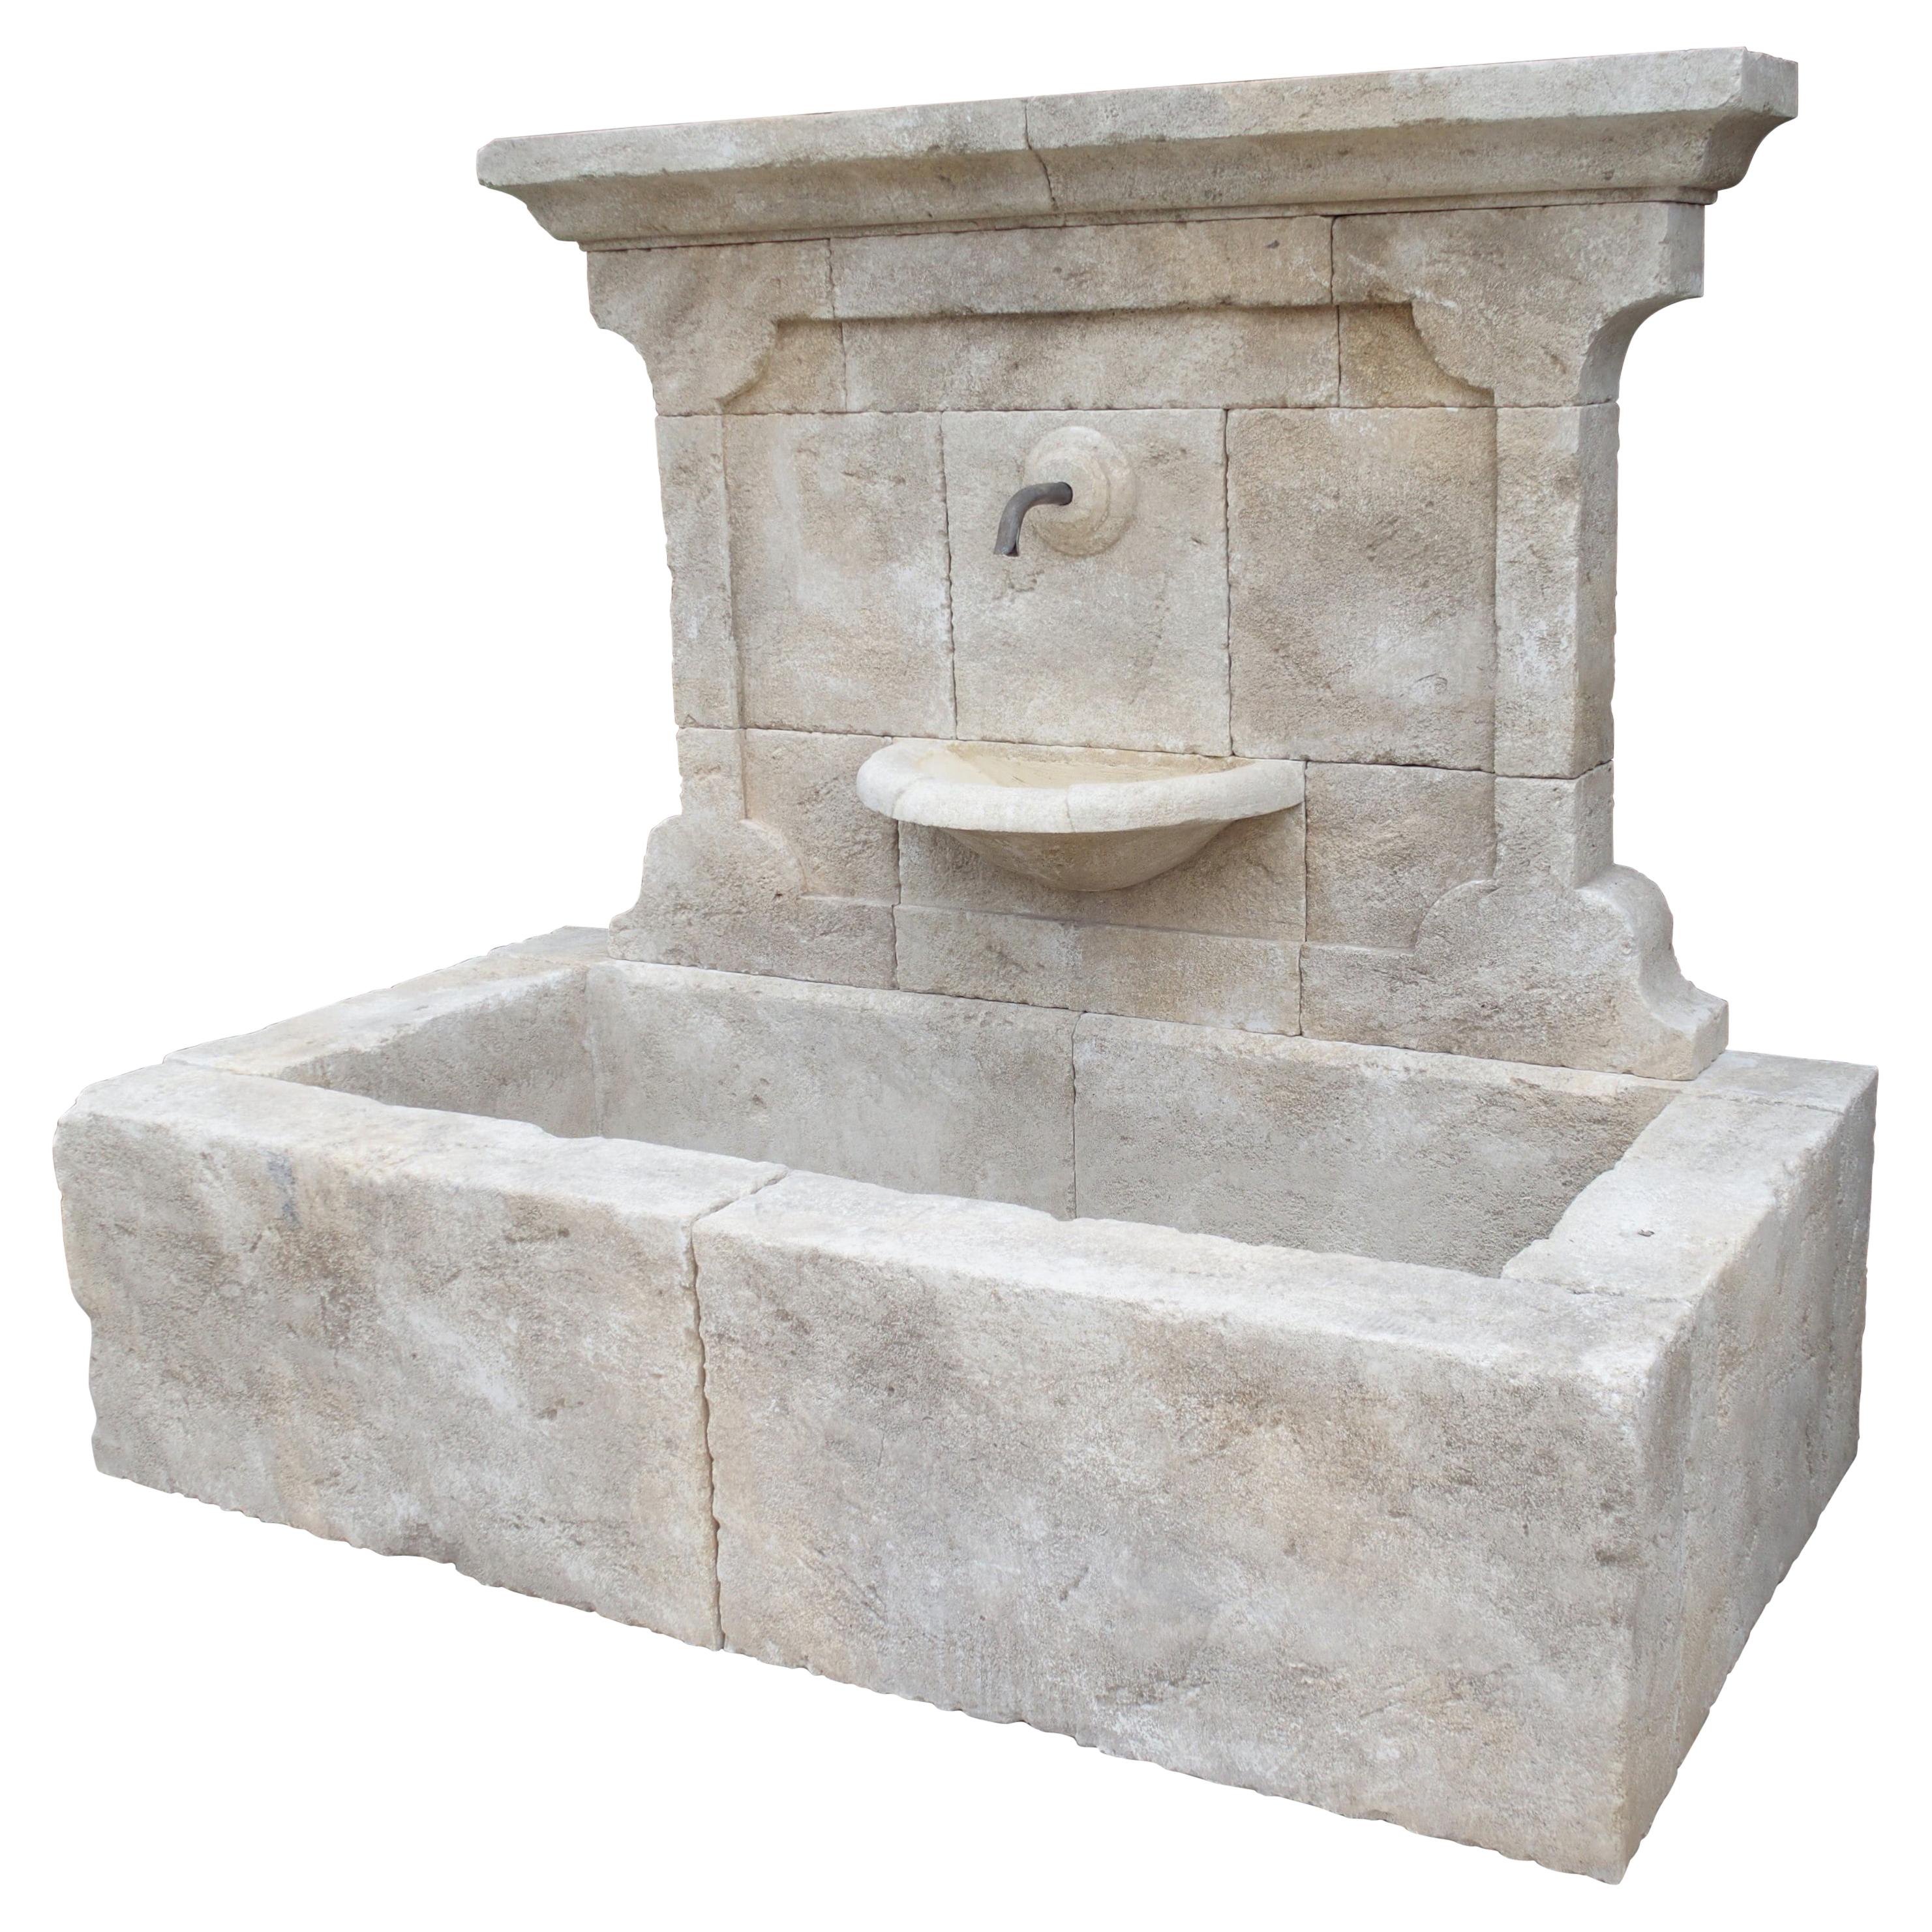 Carved French Stone Wall Fountain with Cast Iron Spout and Spill Bowl